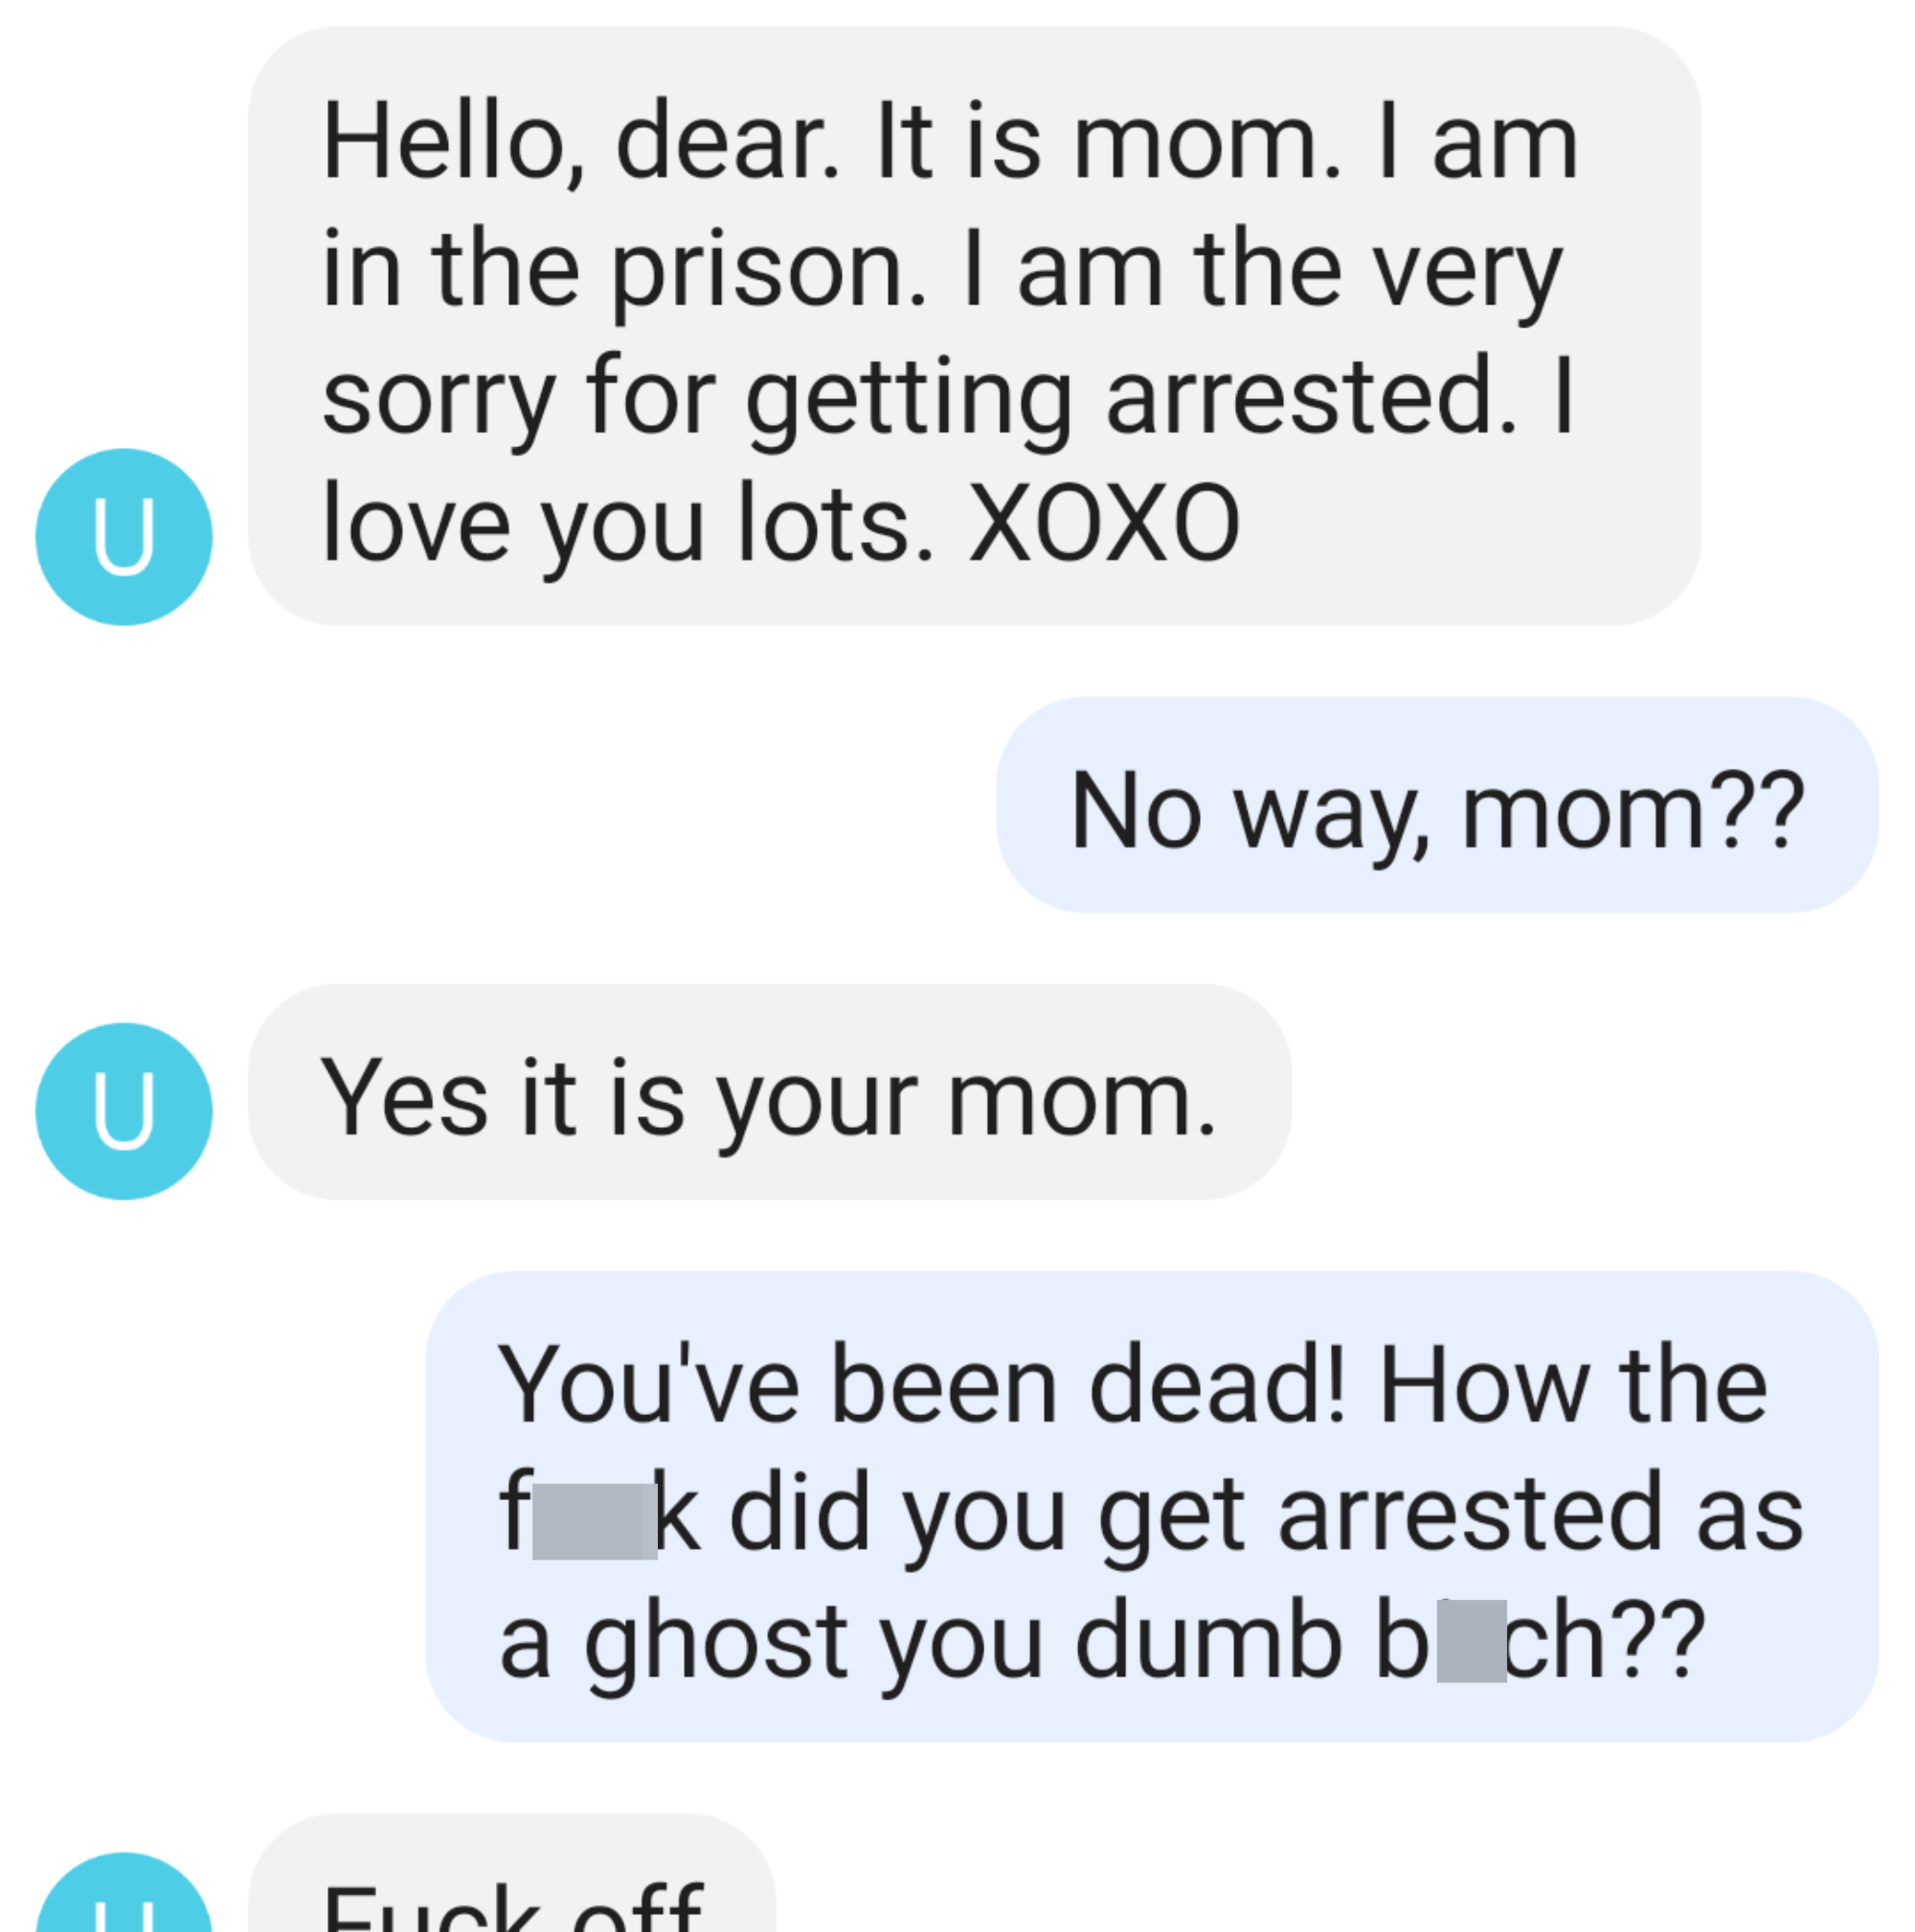 &quot;Hello, dear, it is mom, I am in the prison, I am the very sorry for getting arrested; I love you lots&quot; and person says &quot;No, way, mom??&quot; and &quot;You&#x27;ve been dead! How the fuck did you get arrested as a ghost you dumb bitch??&quot; and scammer says &quot;Fuck off&quot;